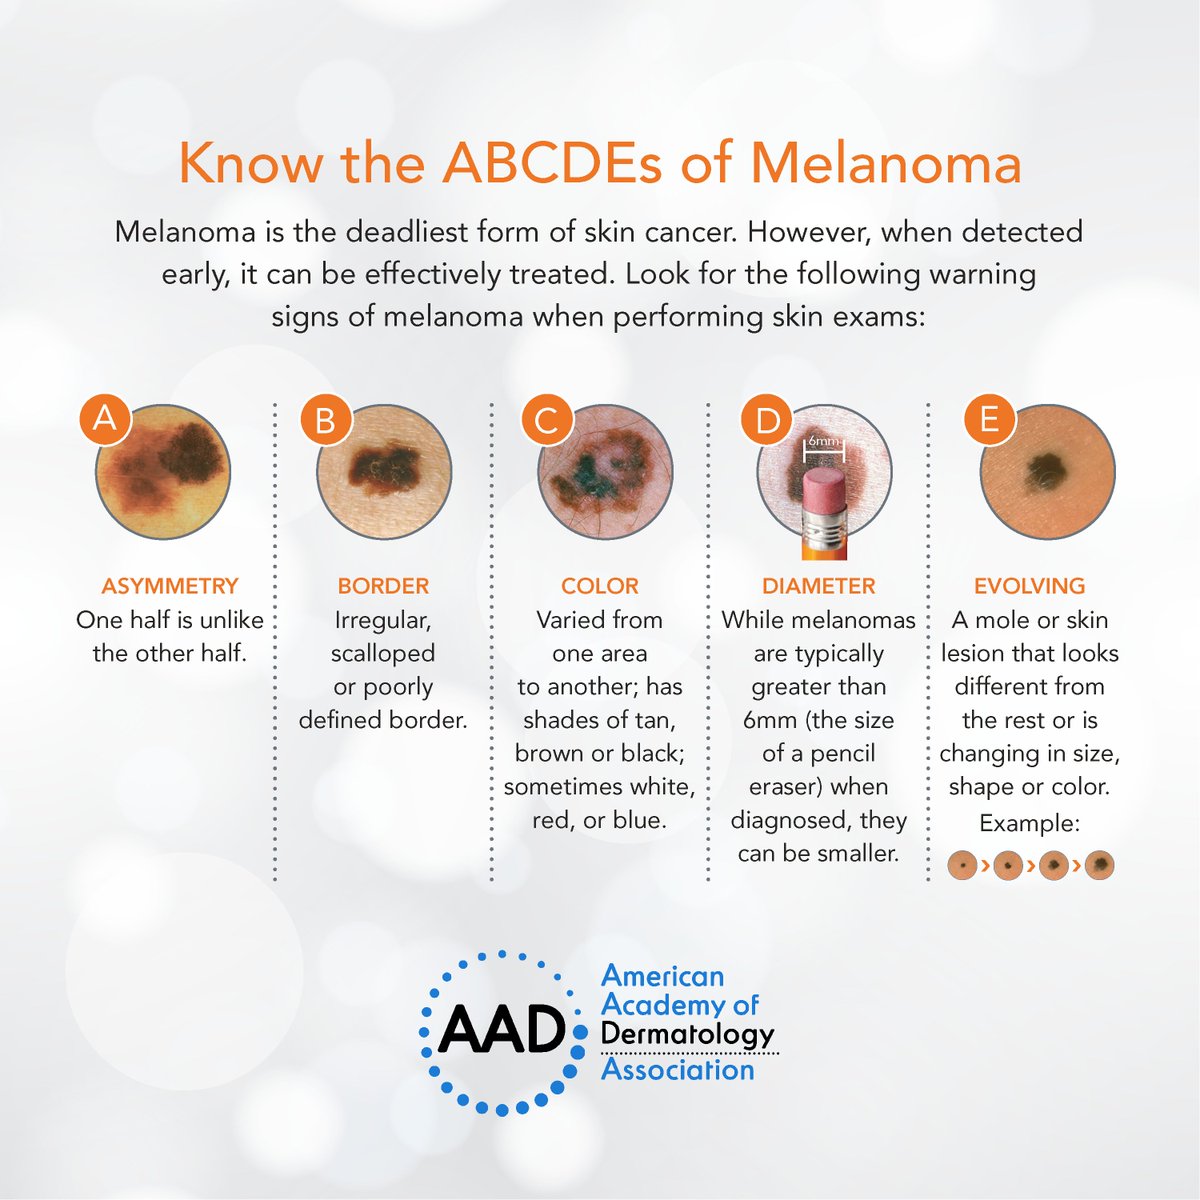 Today is #MelanomaMonday. Help your patients identify the warning signs of the deadliest type of skin cancer by sharing this graphic on social media. 

Access more AAD public resources and promote skin cancer awareness all month long by visiting: aad.org/member/advocac…